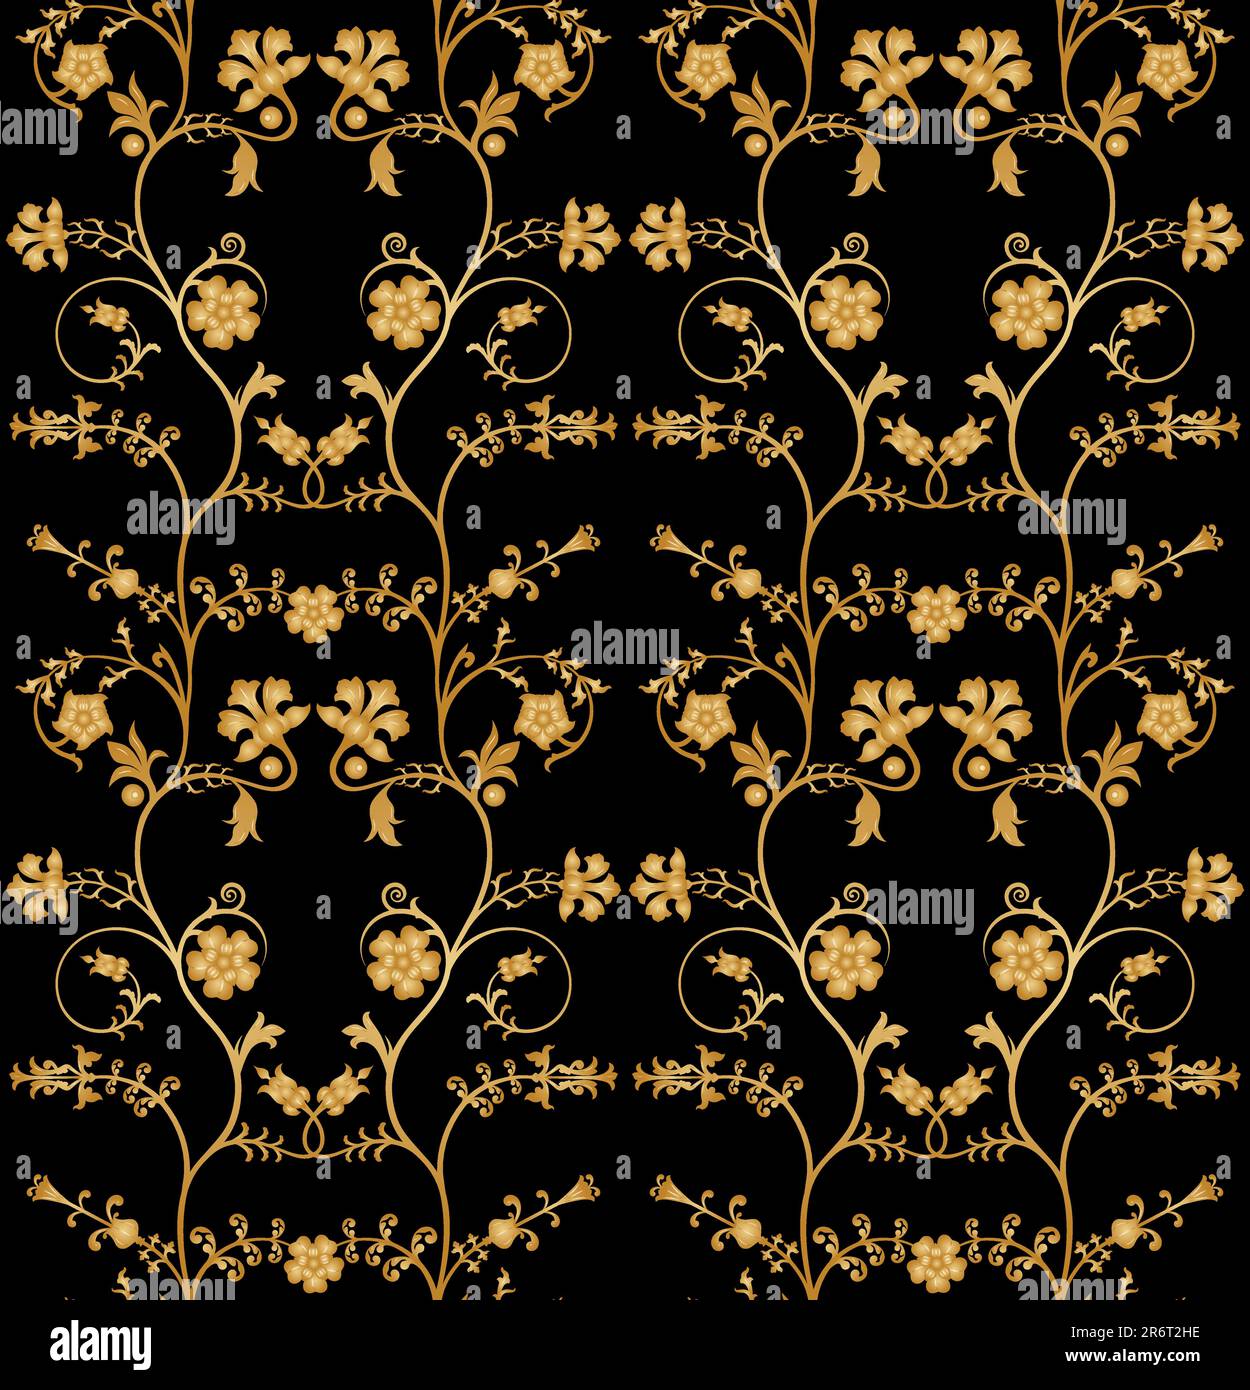 Vector seamless floral pattern on black background. Stock Vector